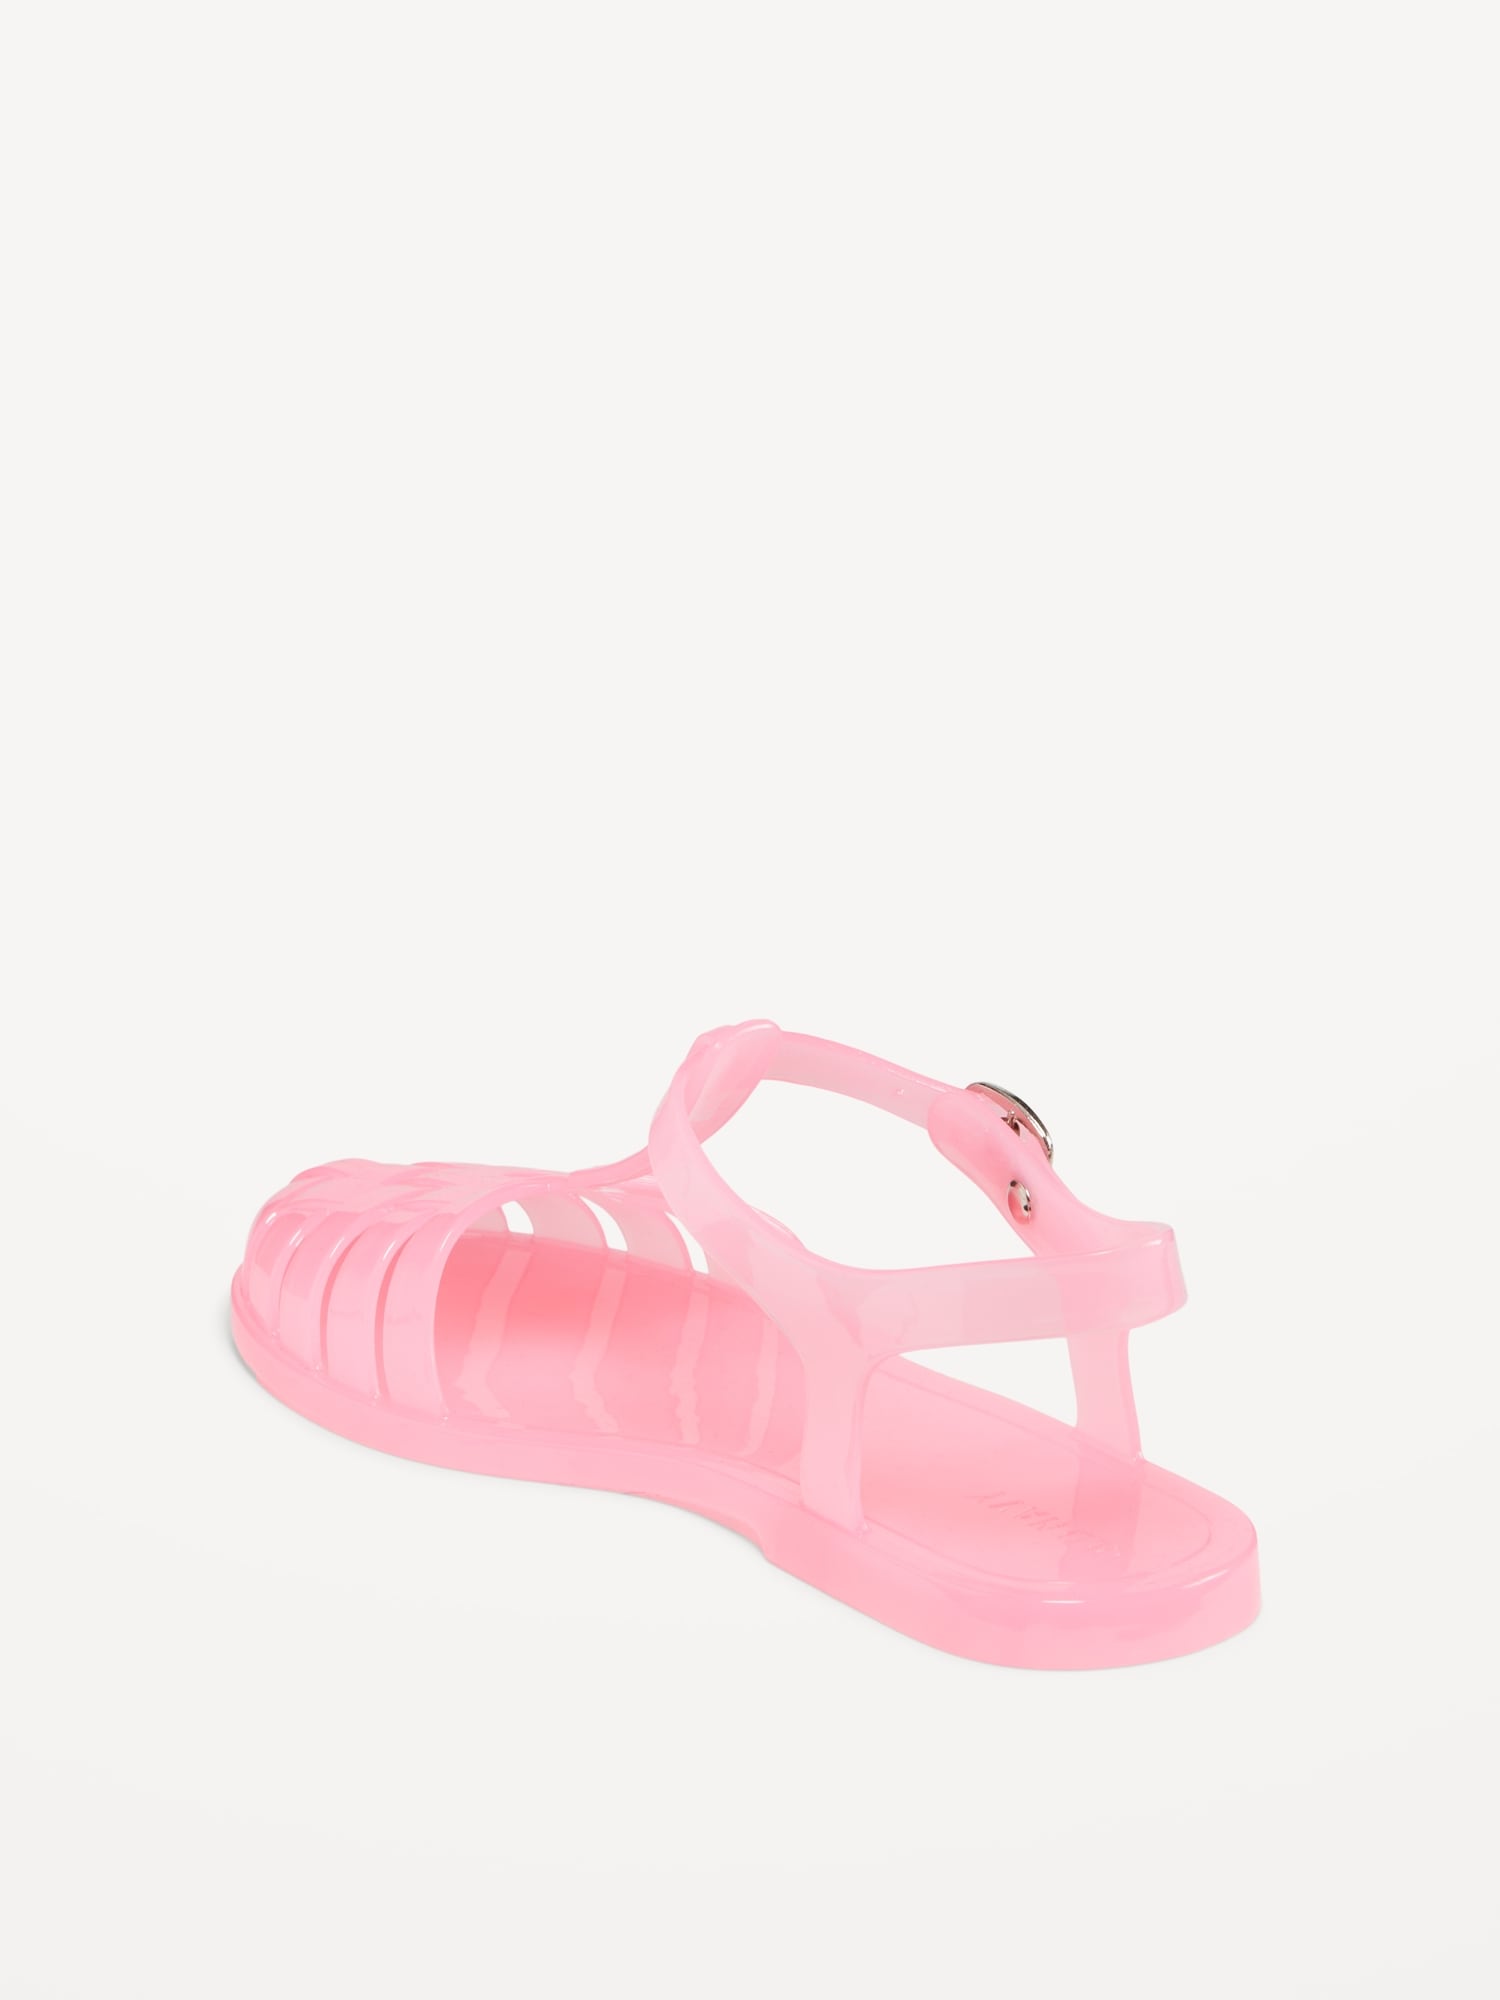 Shiny Jelly Fisherman Sandals for Girls | Old Navy